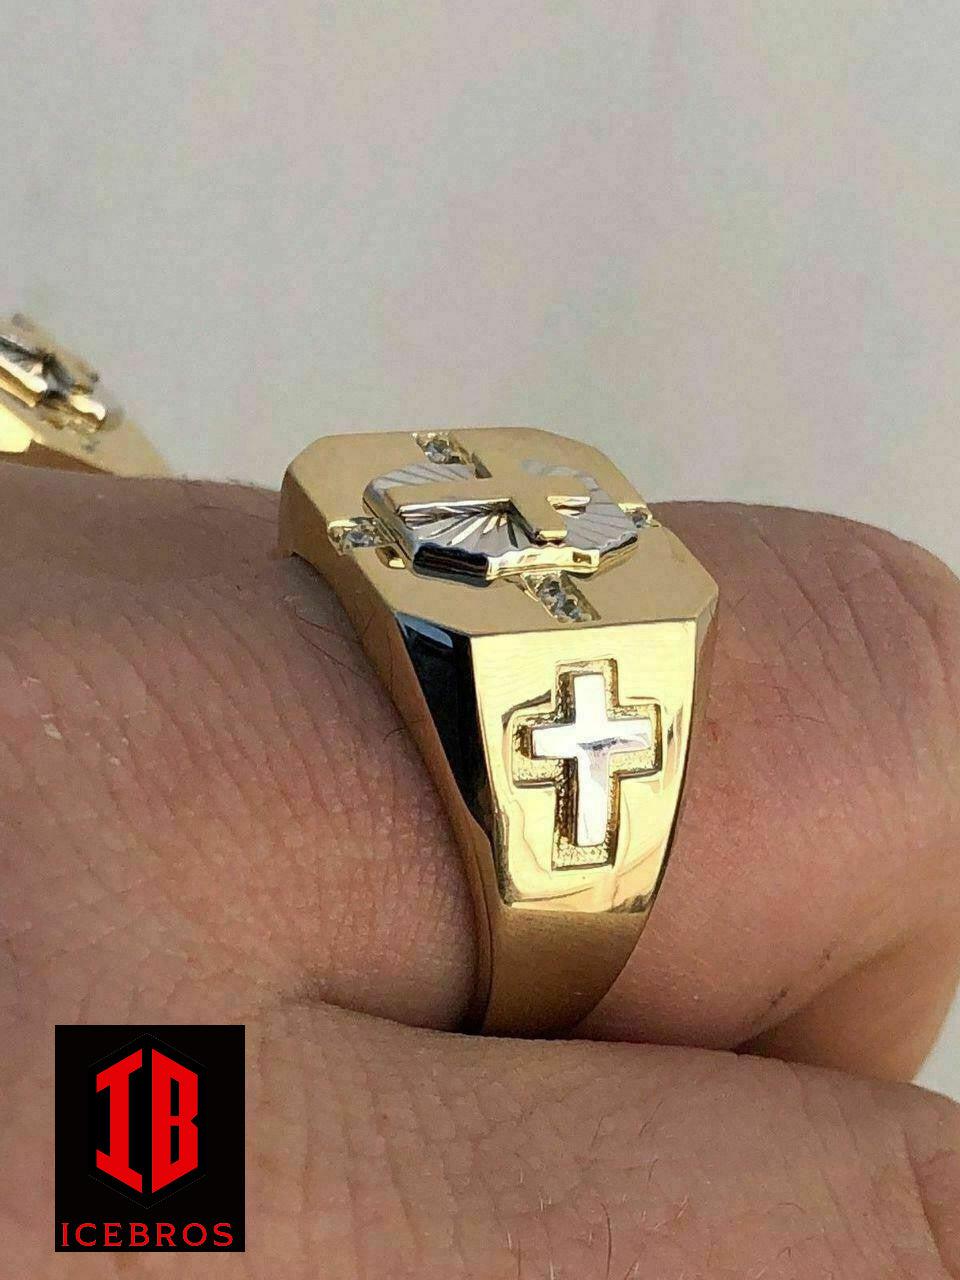 Mens 14k Gold Over Real Solid 925 Silver Cross Ring Size Pinky 7 8 9 10 11 12 13 (CZ)